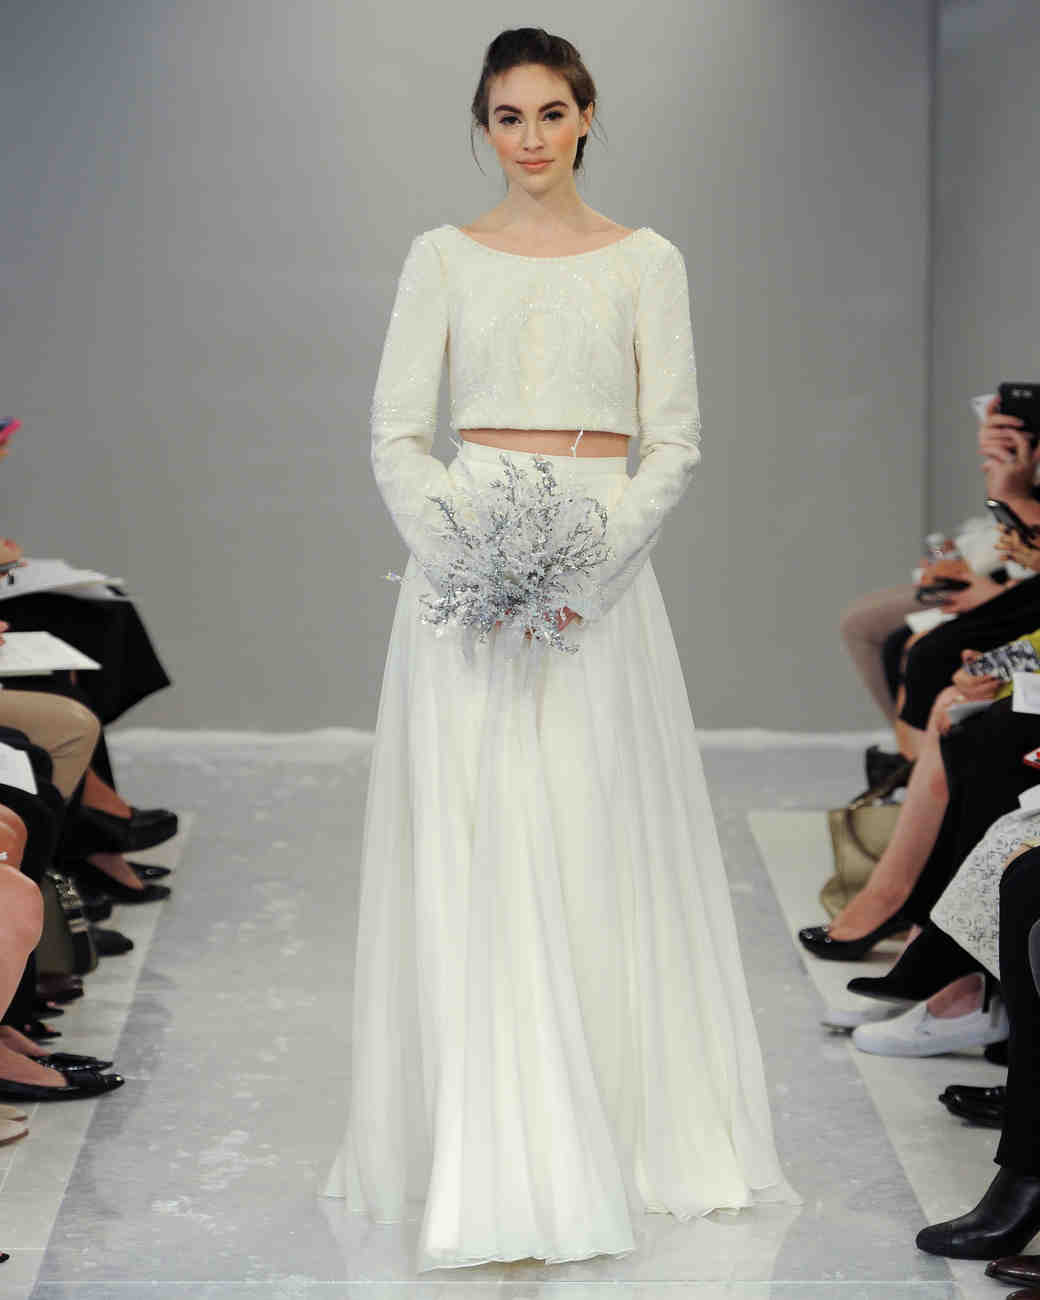 10 Crop-Top Looks From the Bridal Runways That Bare It Beautifully ...